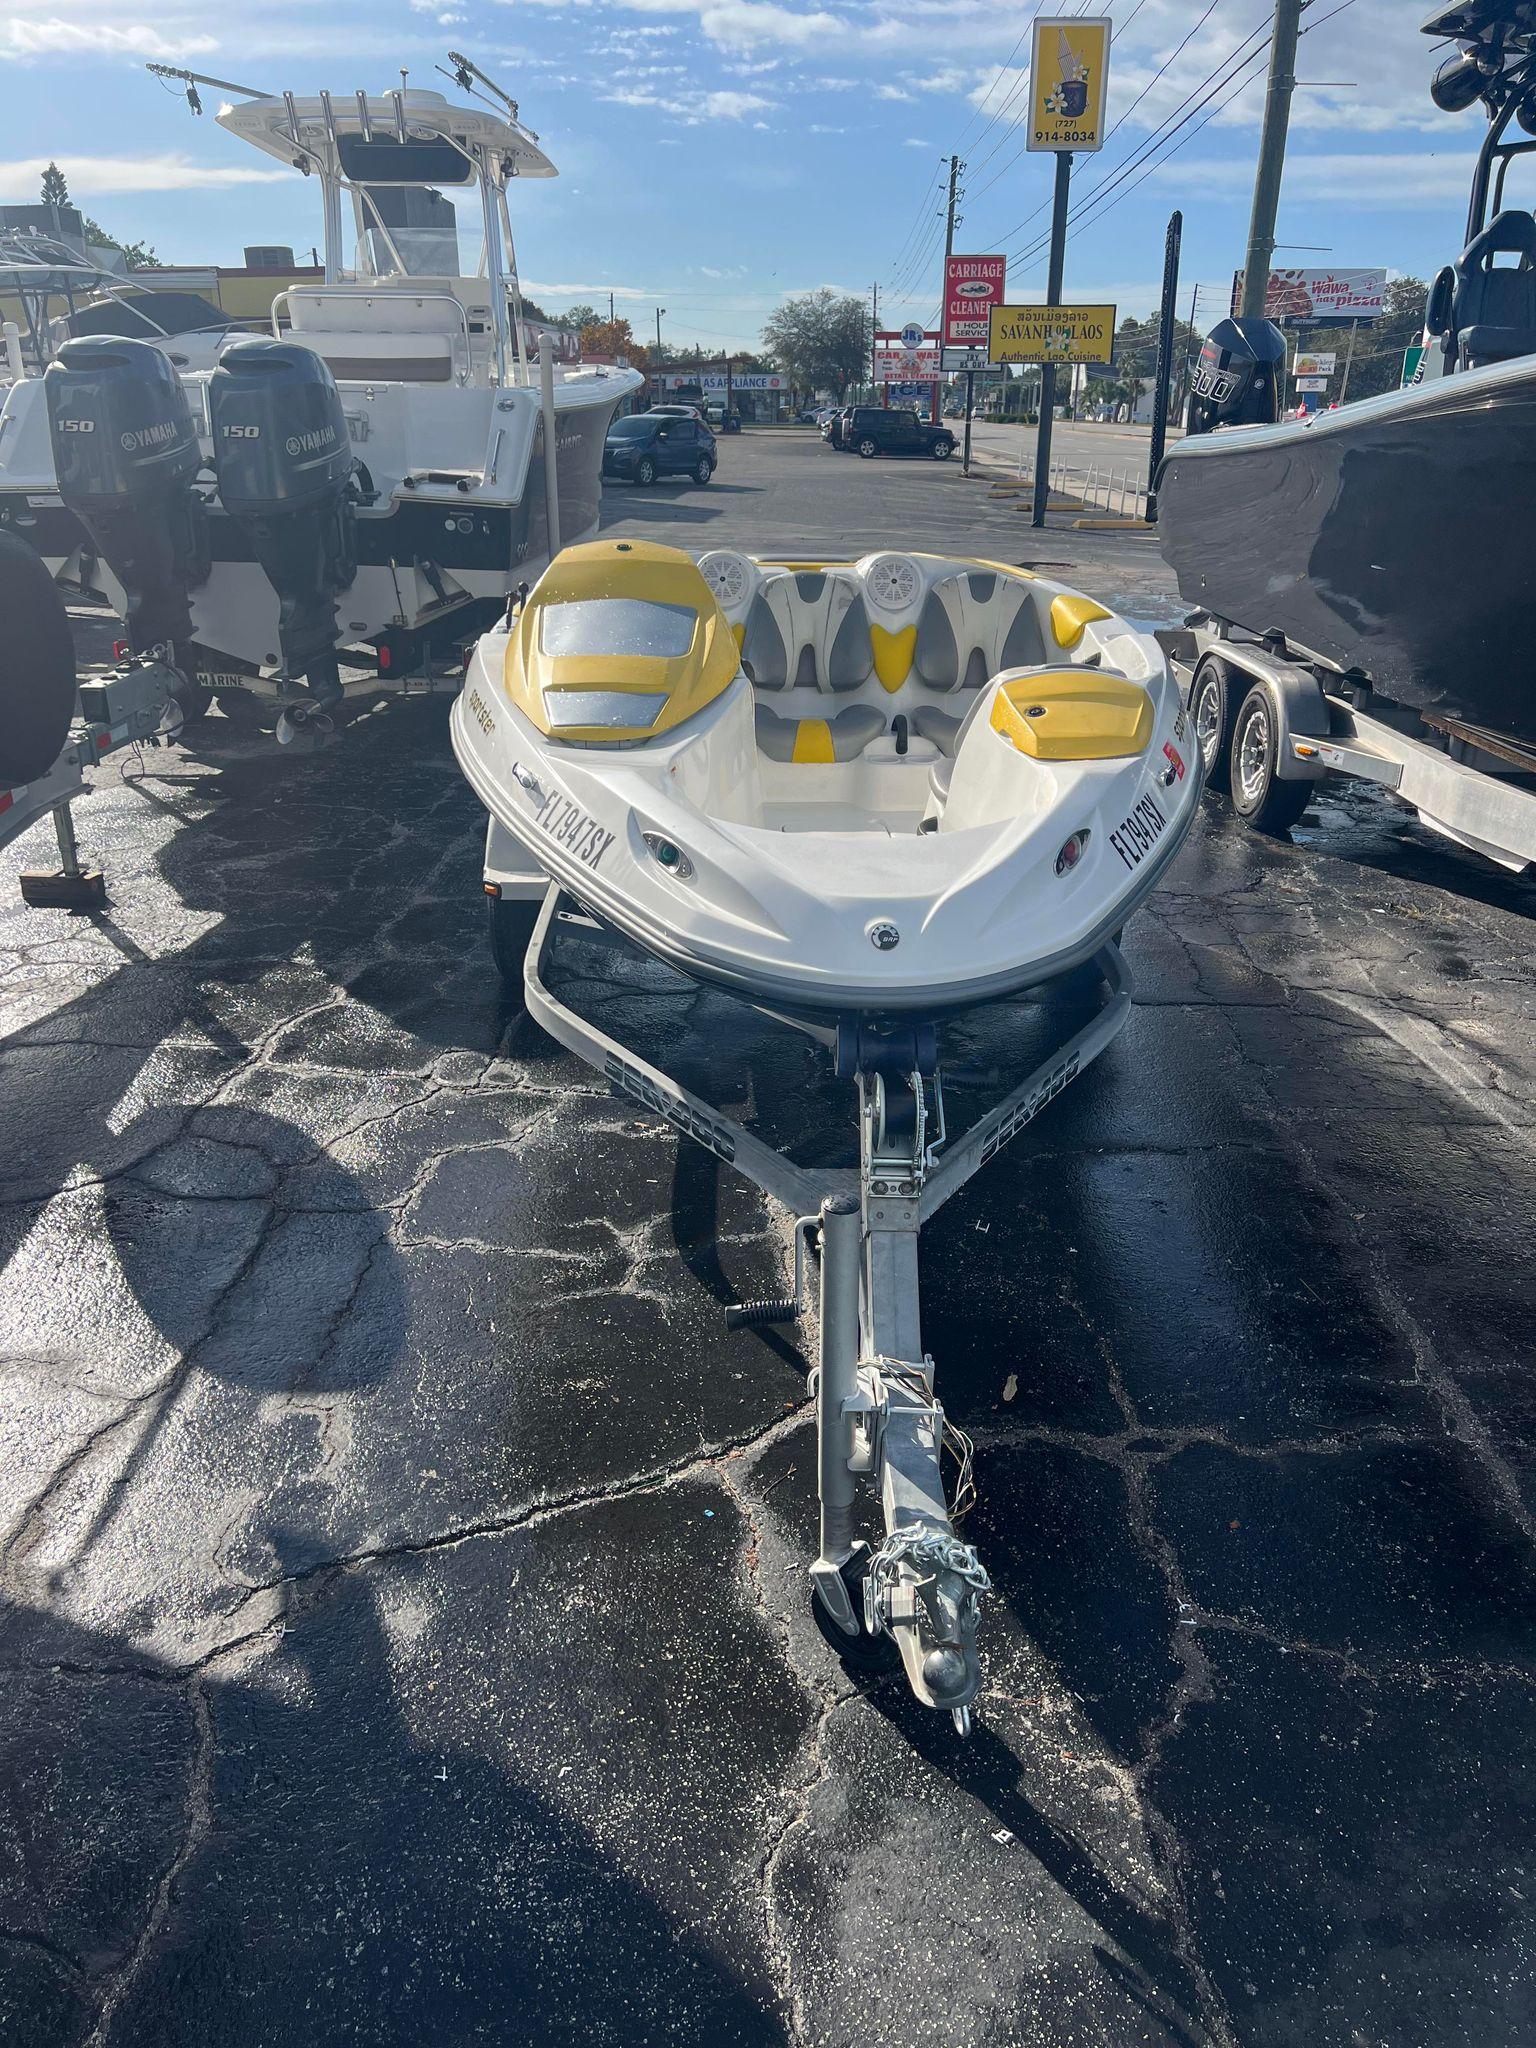 Sea-Doo Sportster boats for sale - Boat Trader